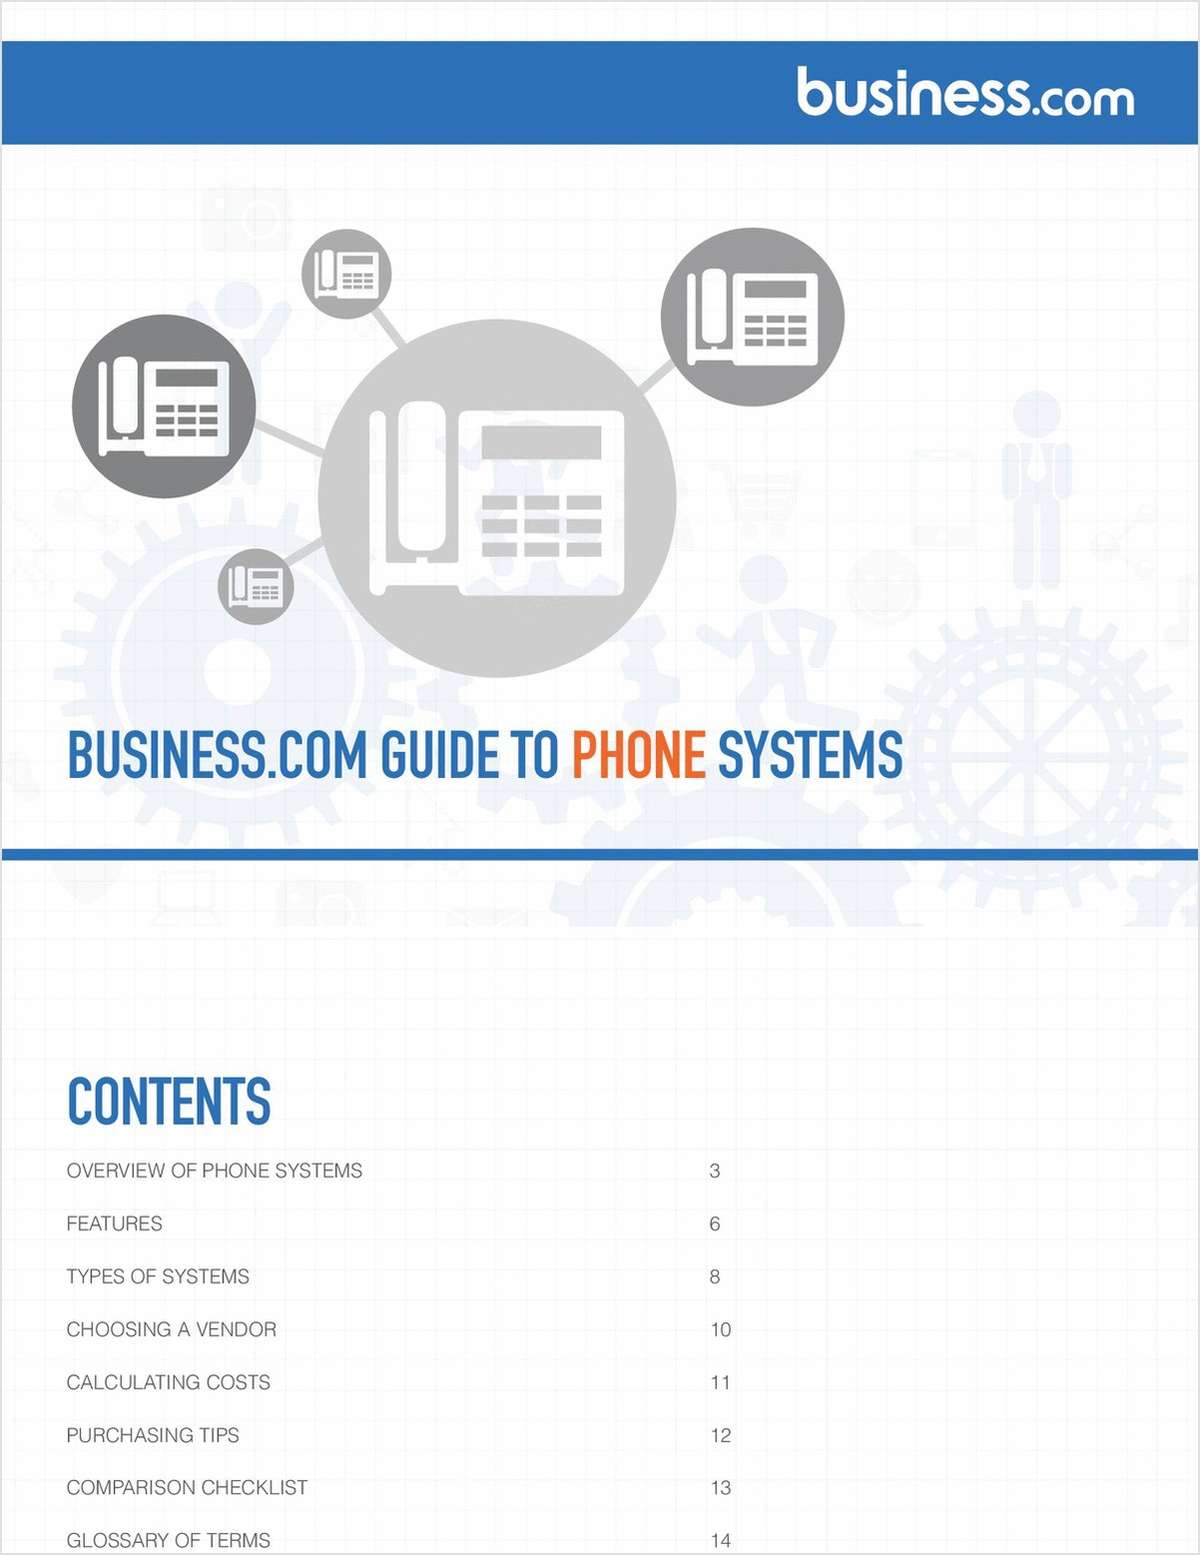 What To Look For In A New Phone System For Your Business